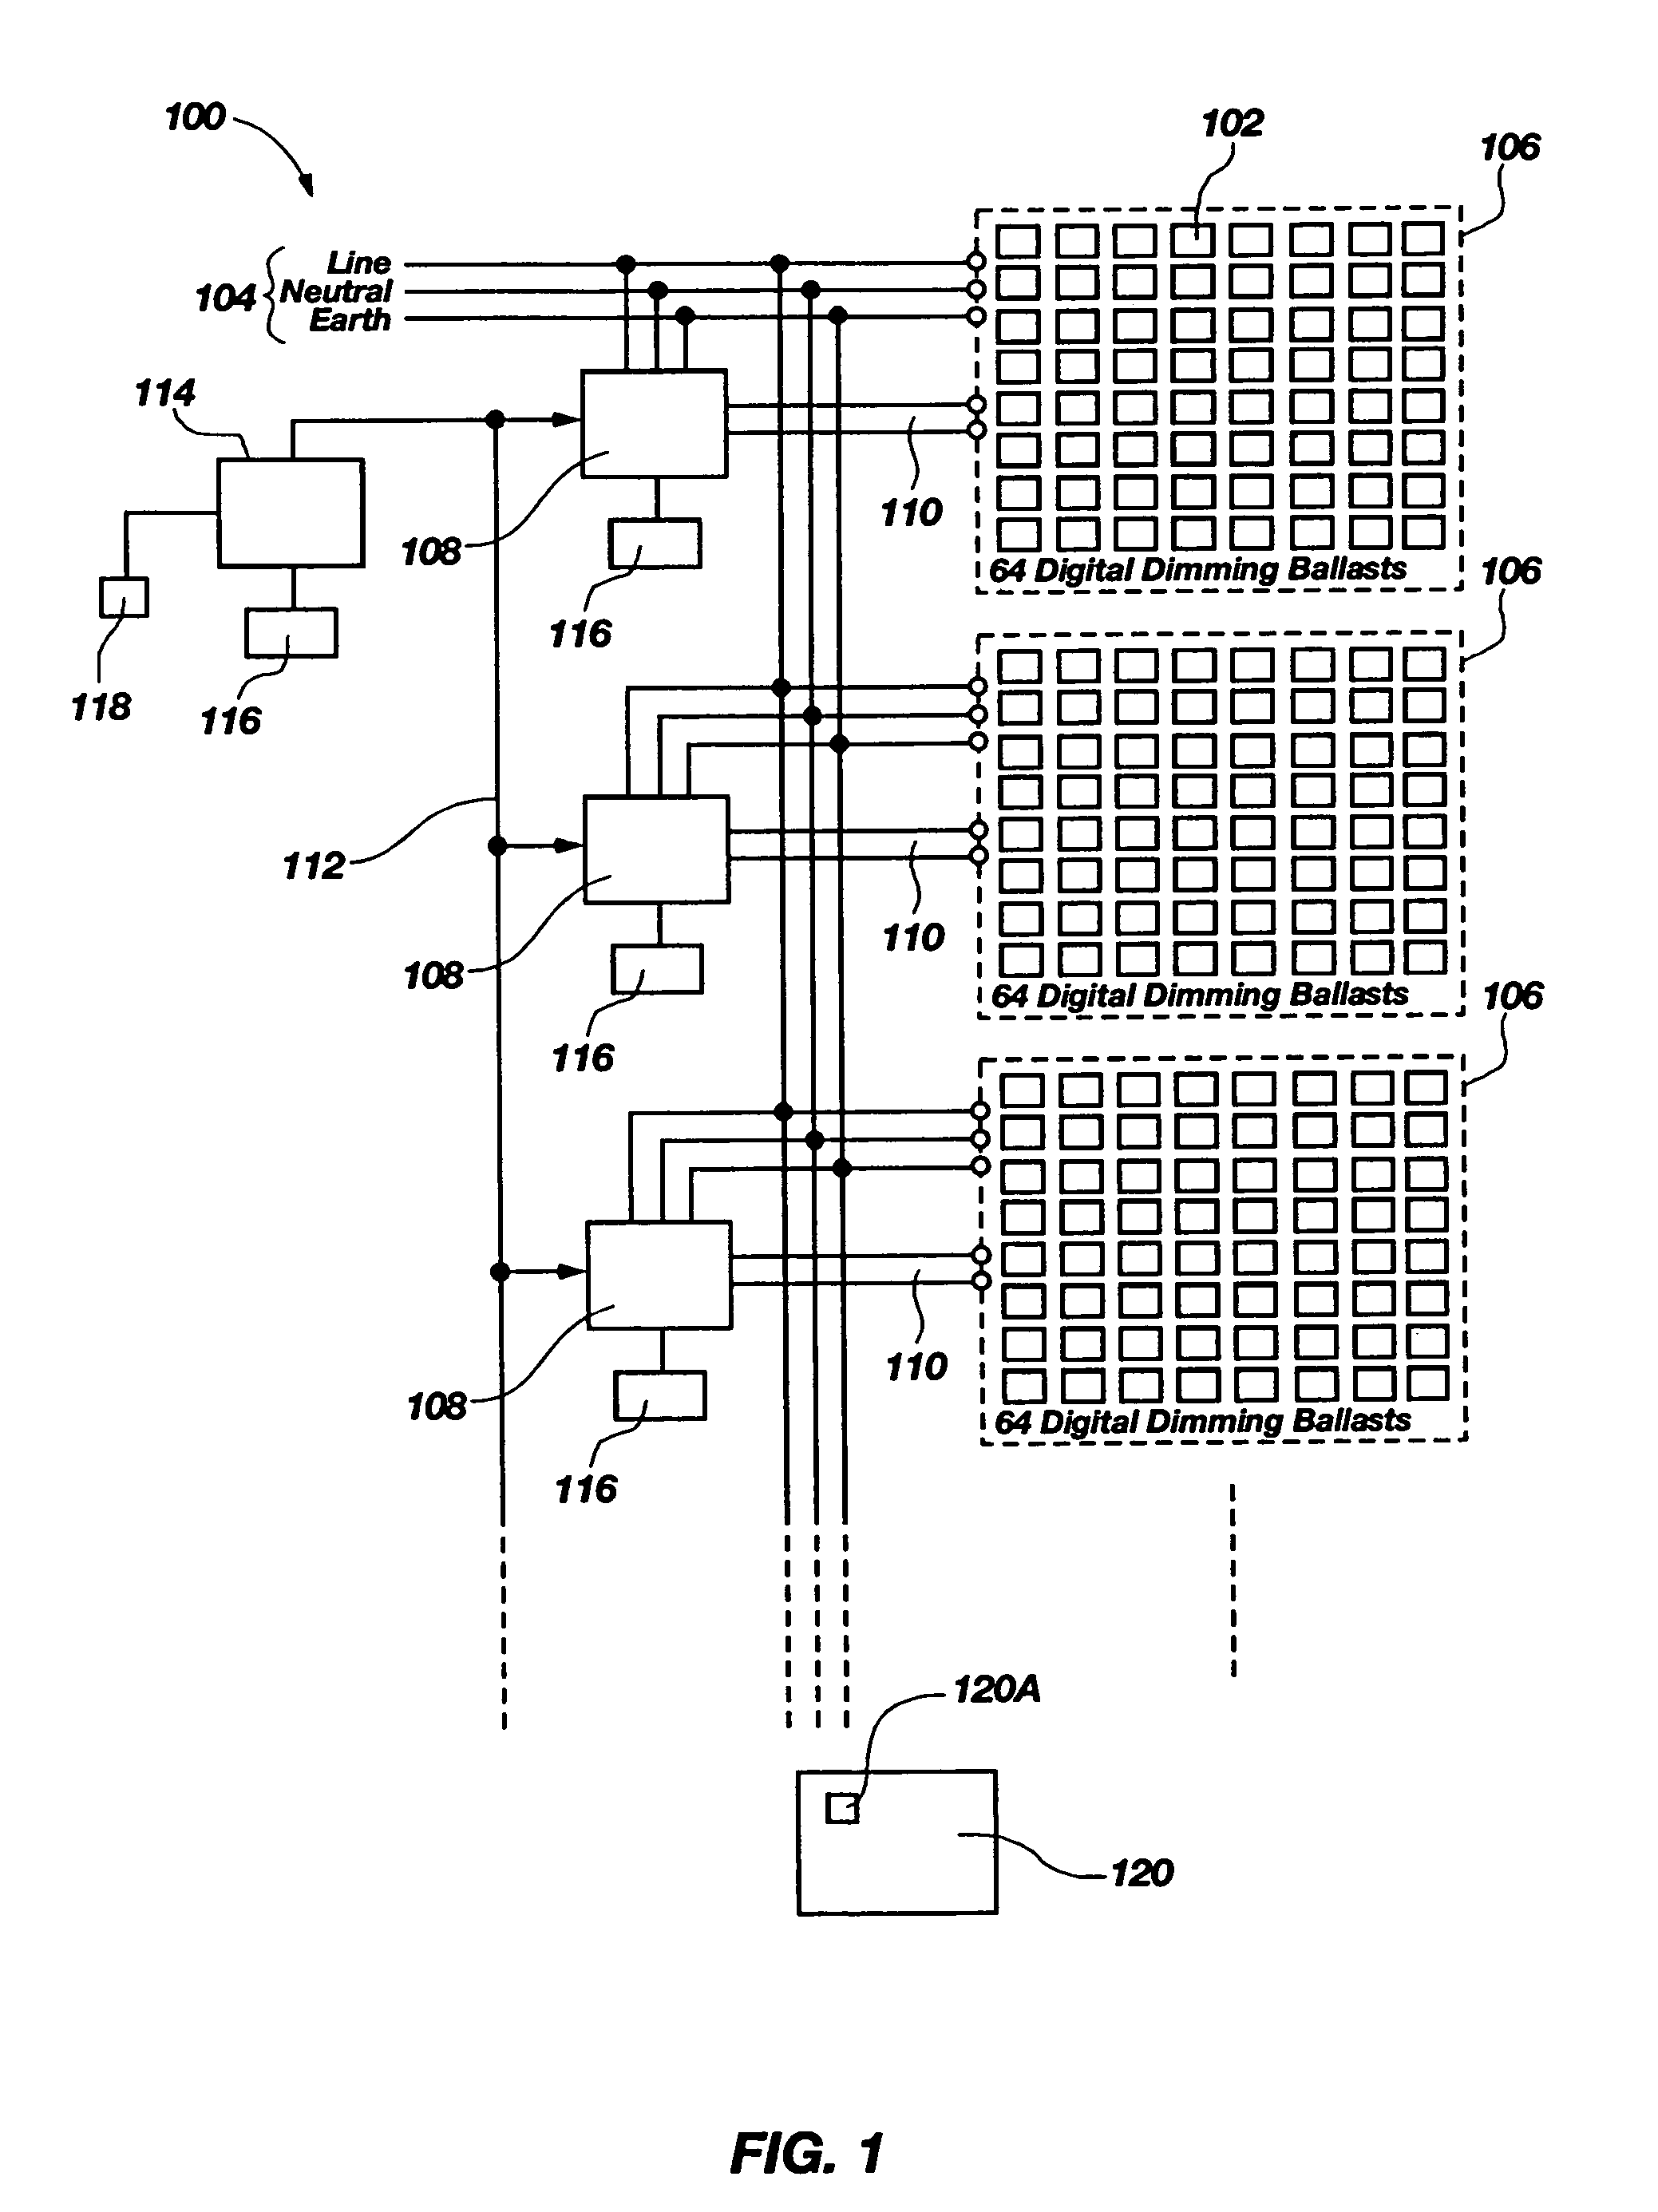 System and method for commissioning addressable lighting systems